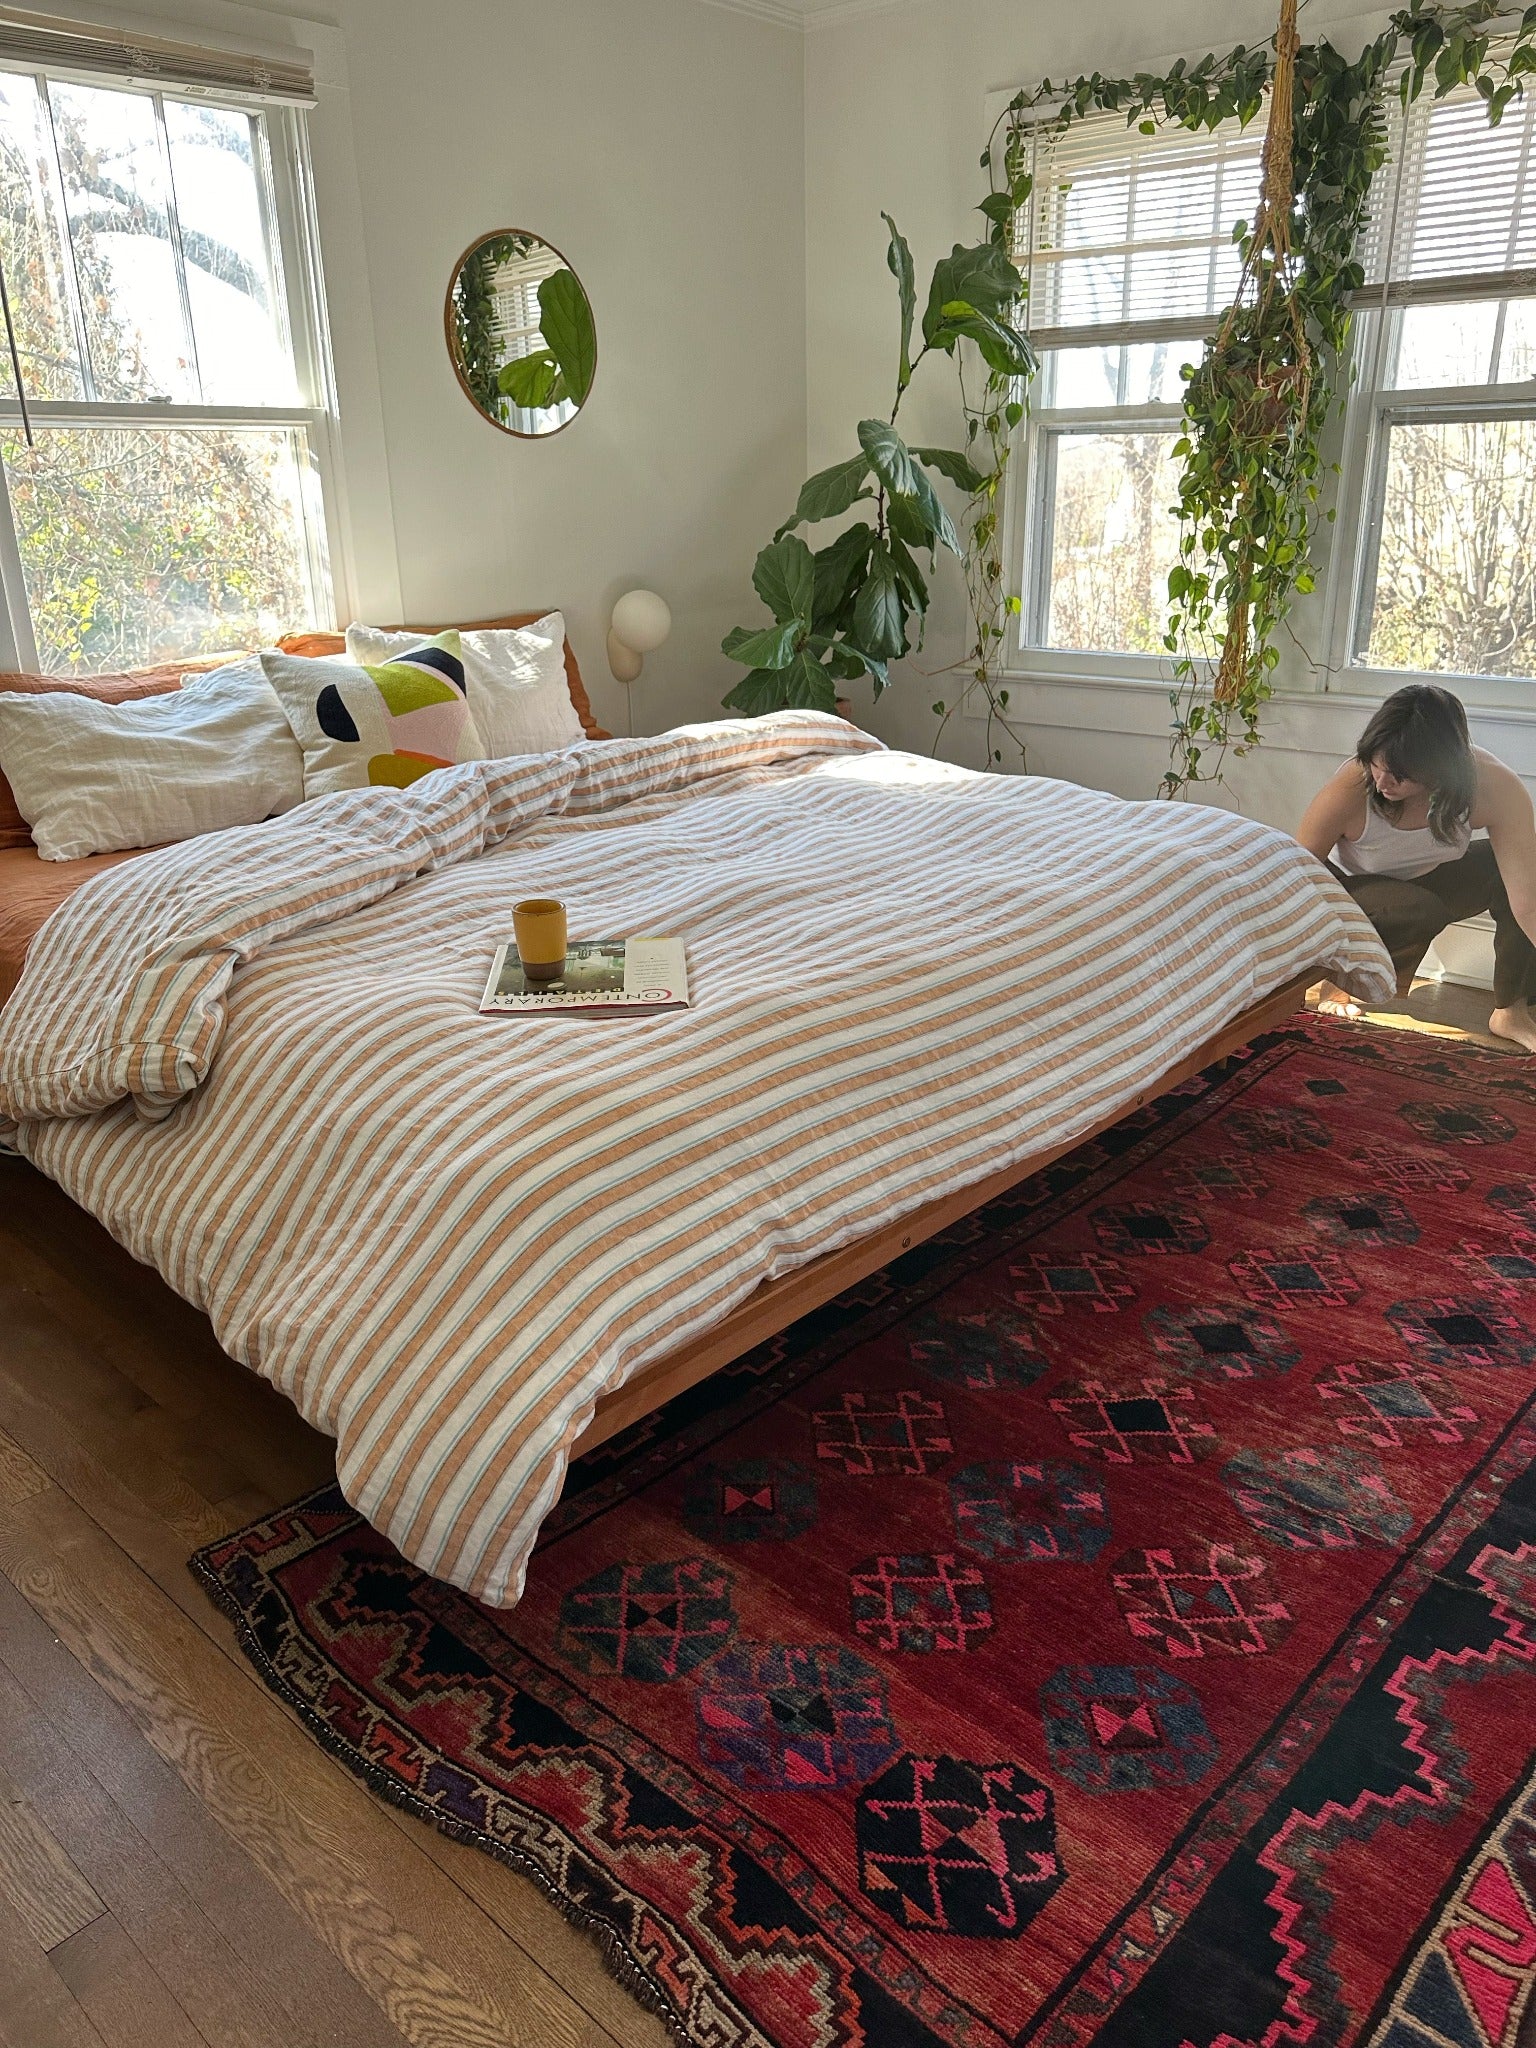 Hyssop Persian Rug Styled in a Bedroom